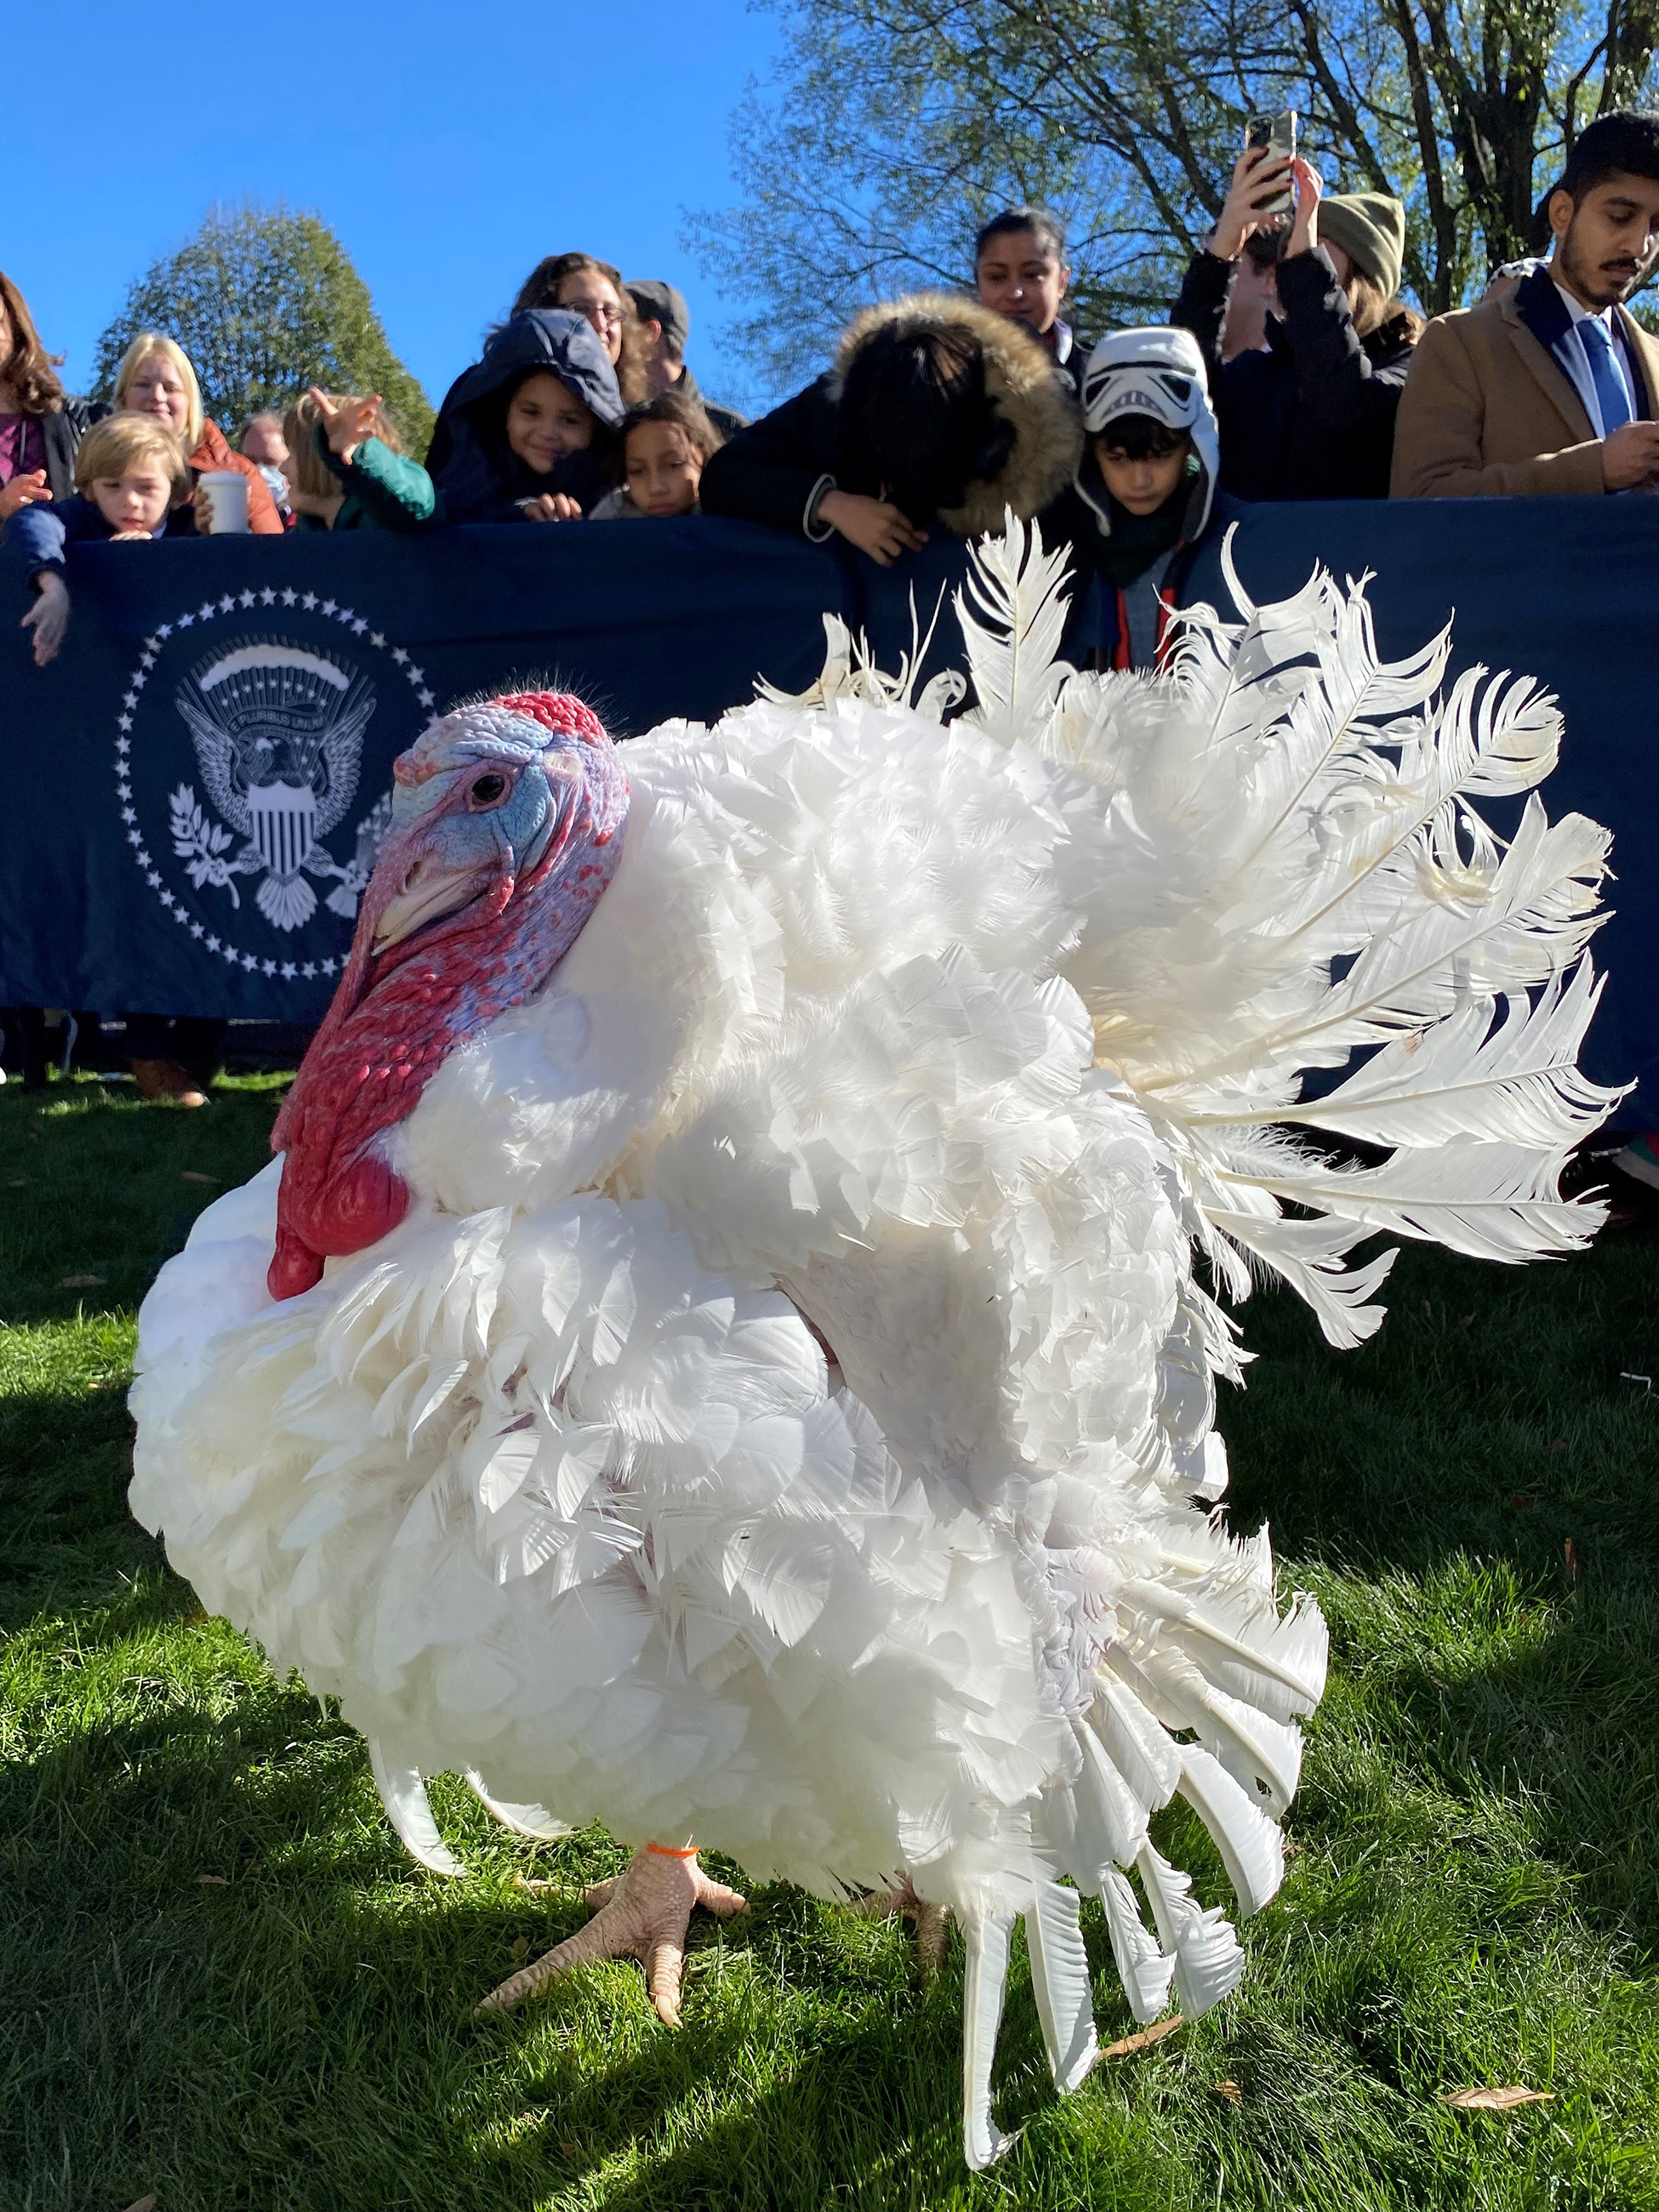 Chocolate, the National Thanksgiving Turkey, strutted his stuff for the kids in attendance!